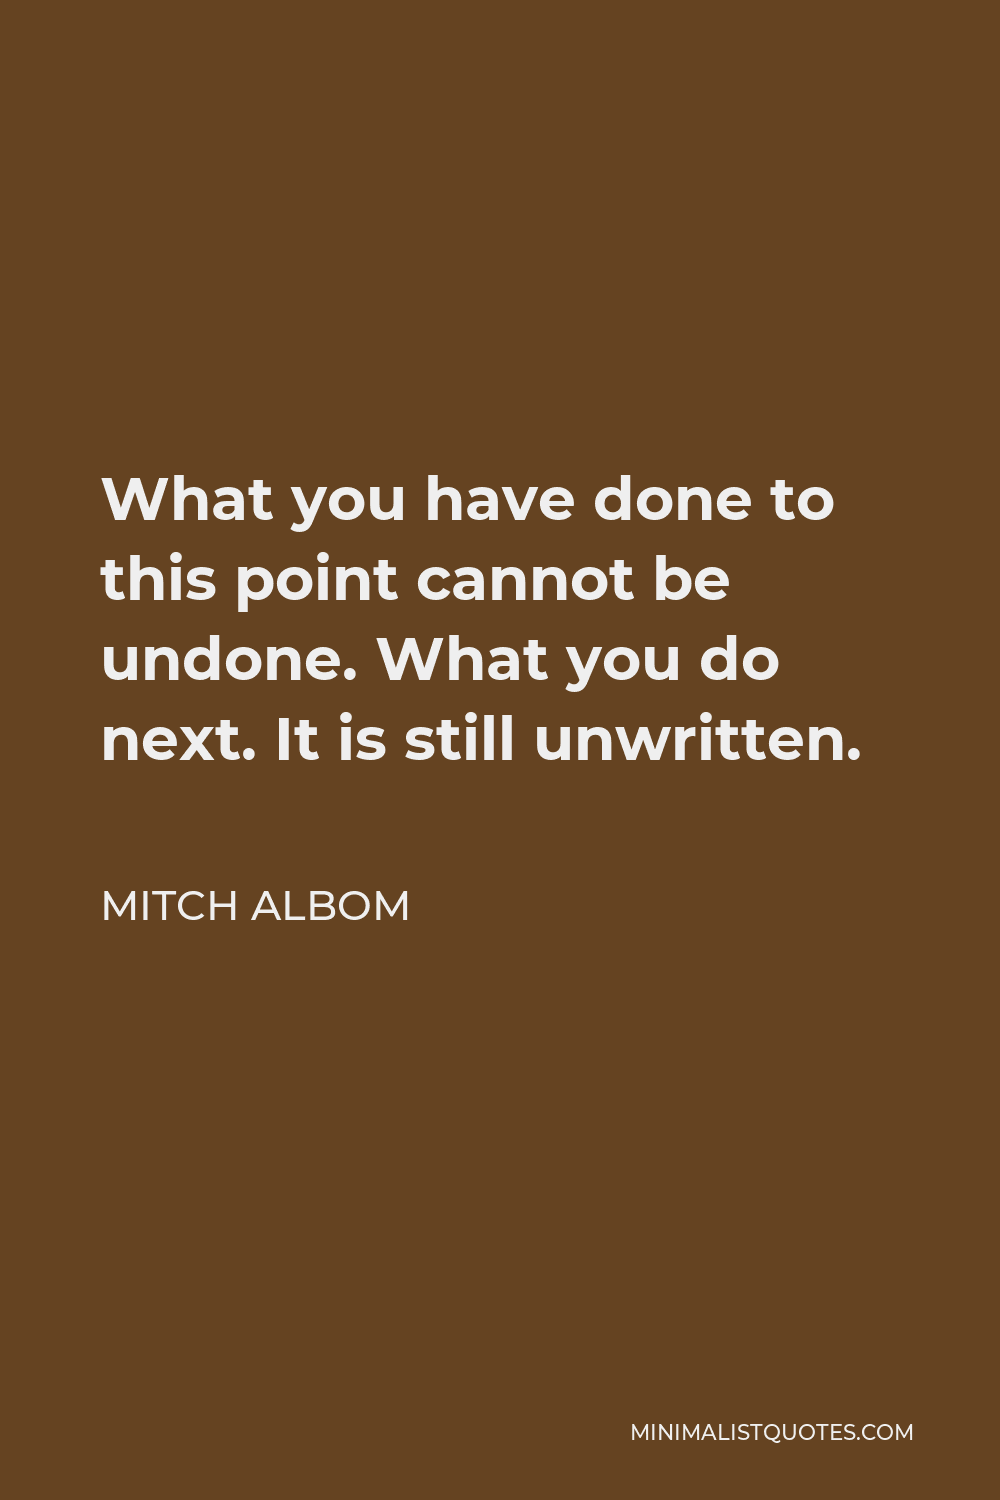 Mitch Albom Quote - What you have done to this point cannot be undone. What you do next. It is still unwritten.